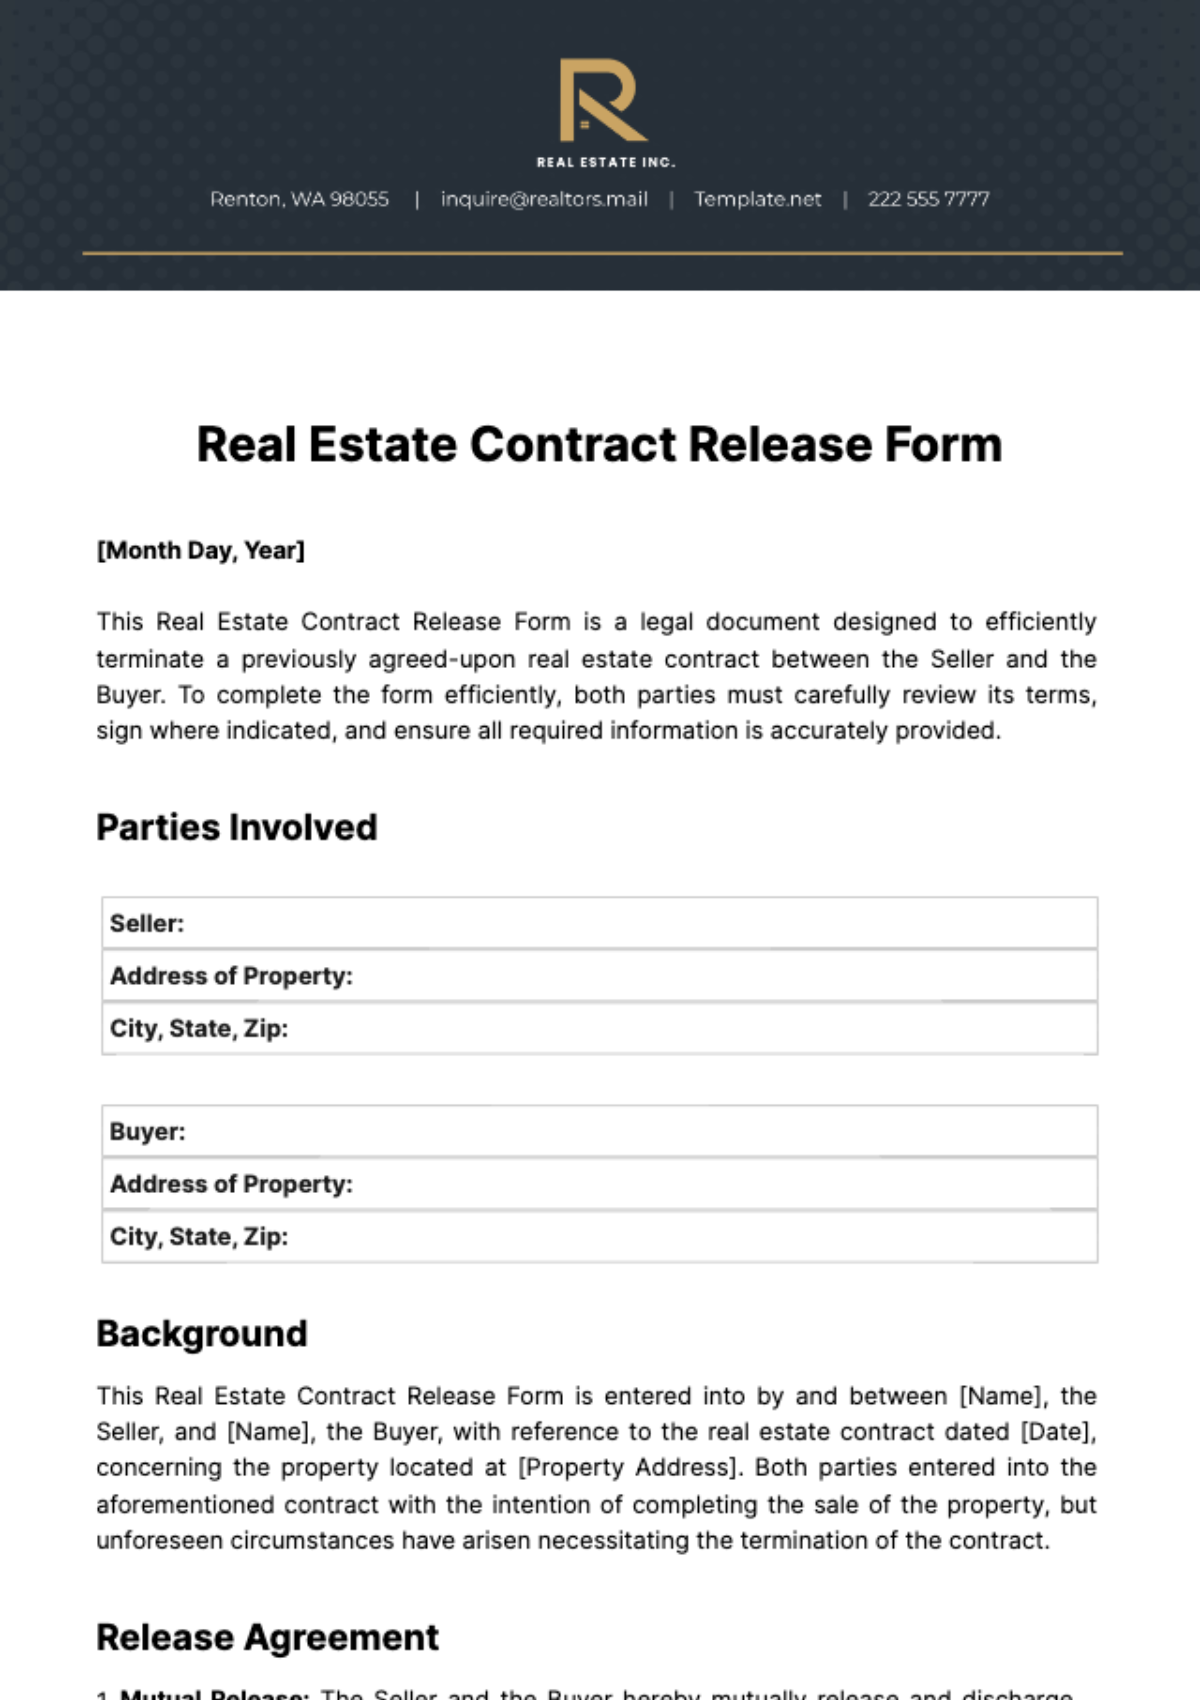 Real Estate Contract Release Form Template